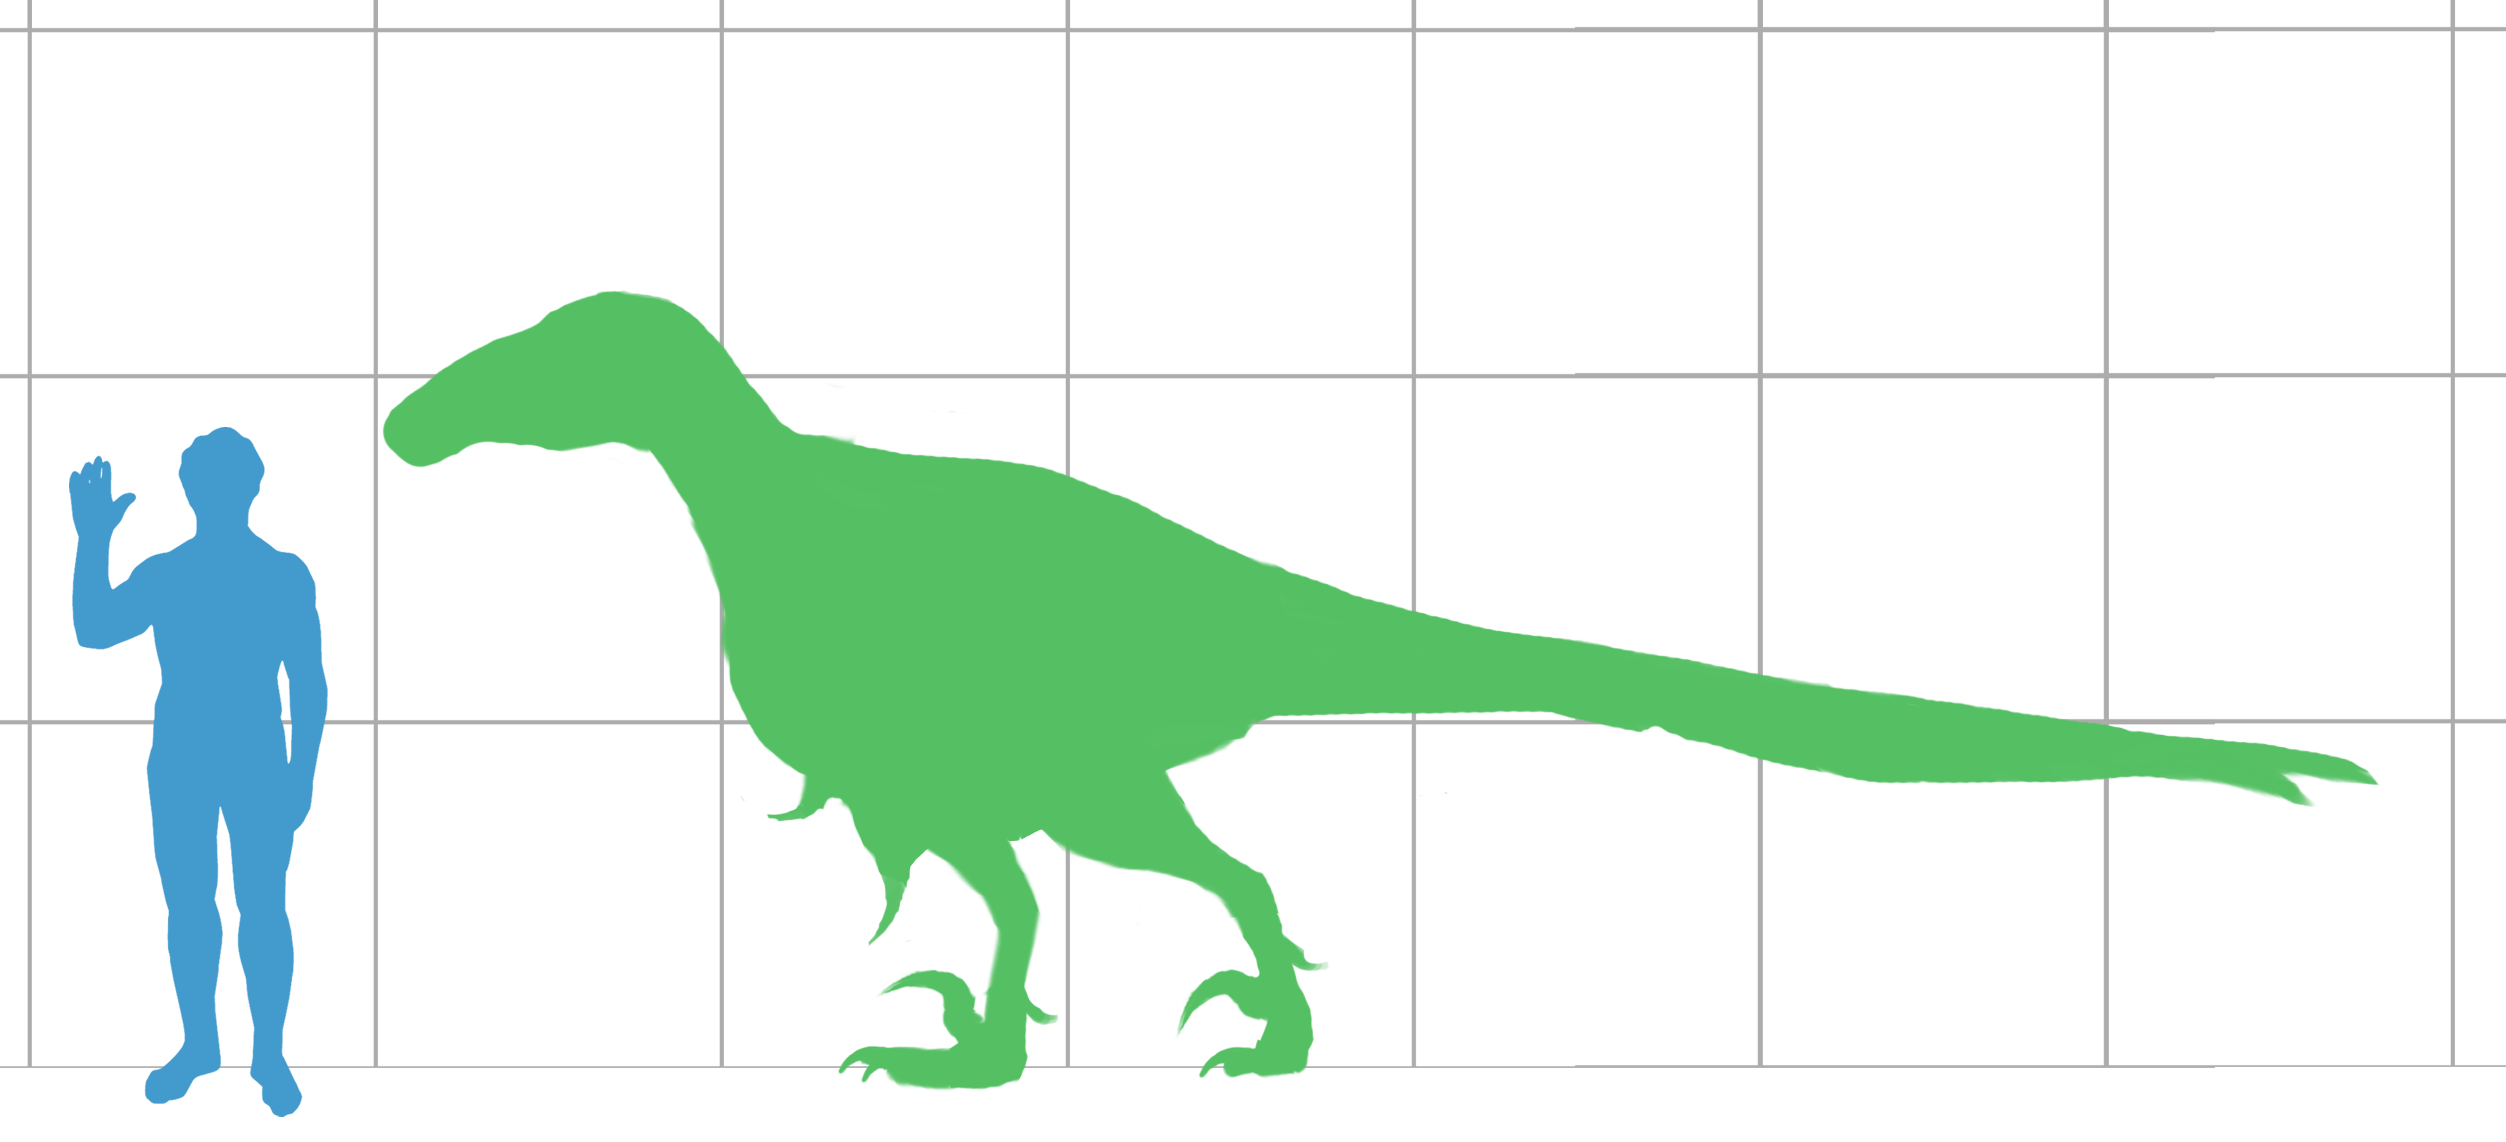 http://upload.wikimedia.org/wikipedia/commons/4/4a/Utahraptor_scale.png